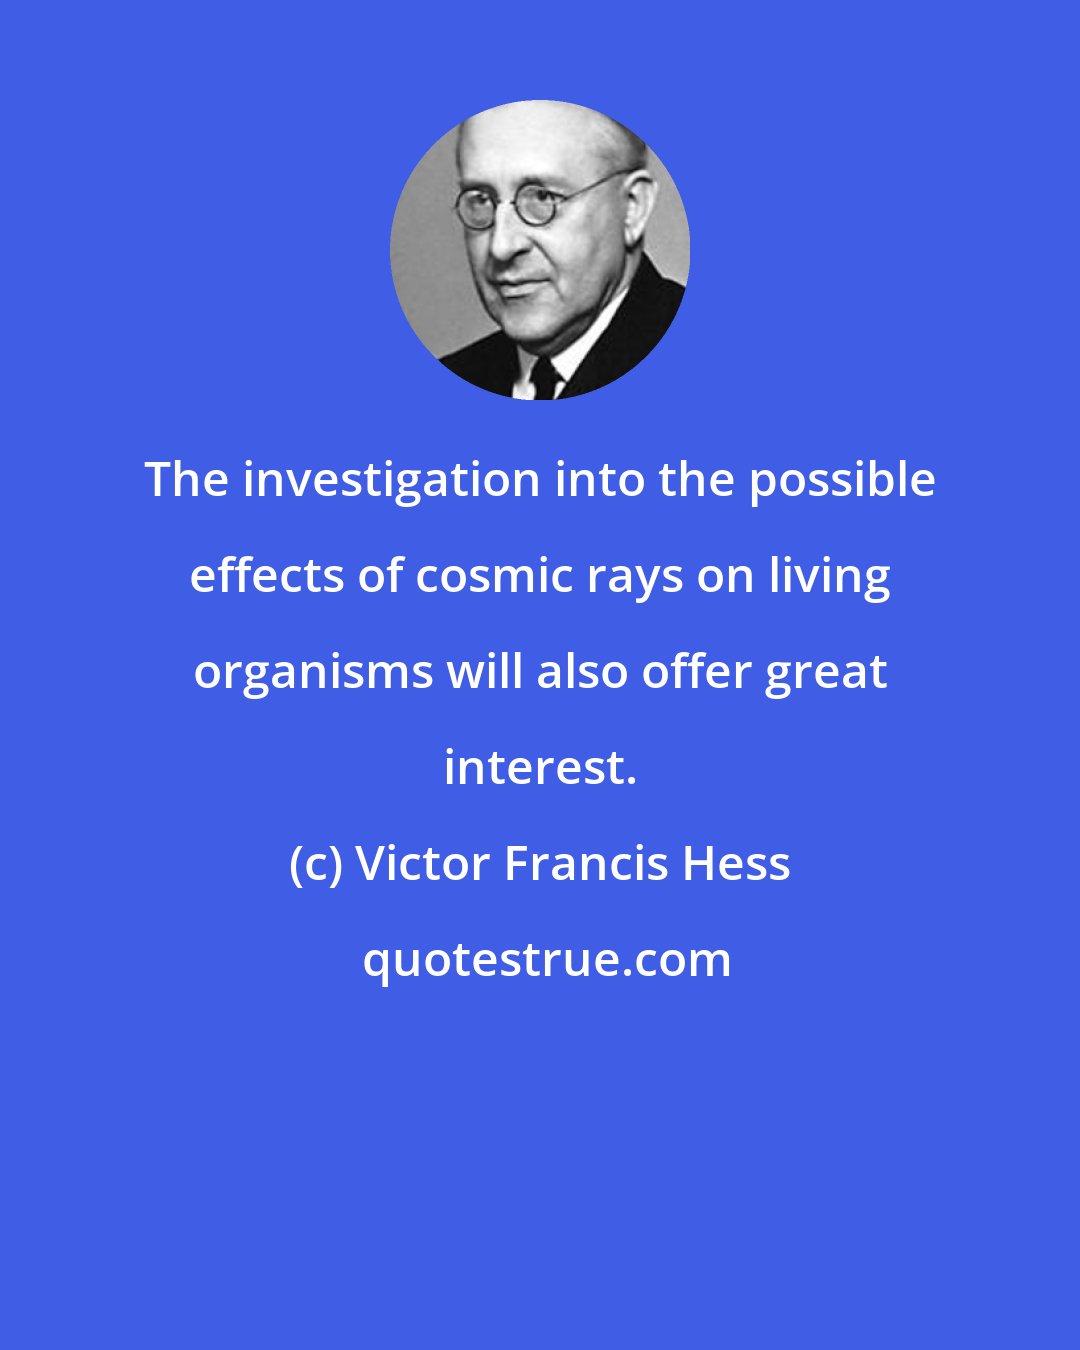 Victor Francis Hess: The investigation into the possible effects of cosmic rays on living organisms will also offer great interest.